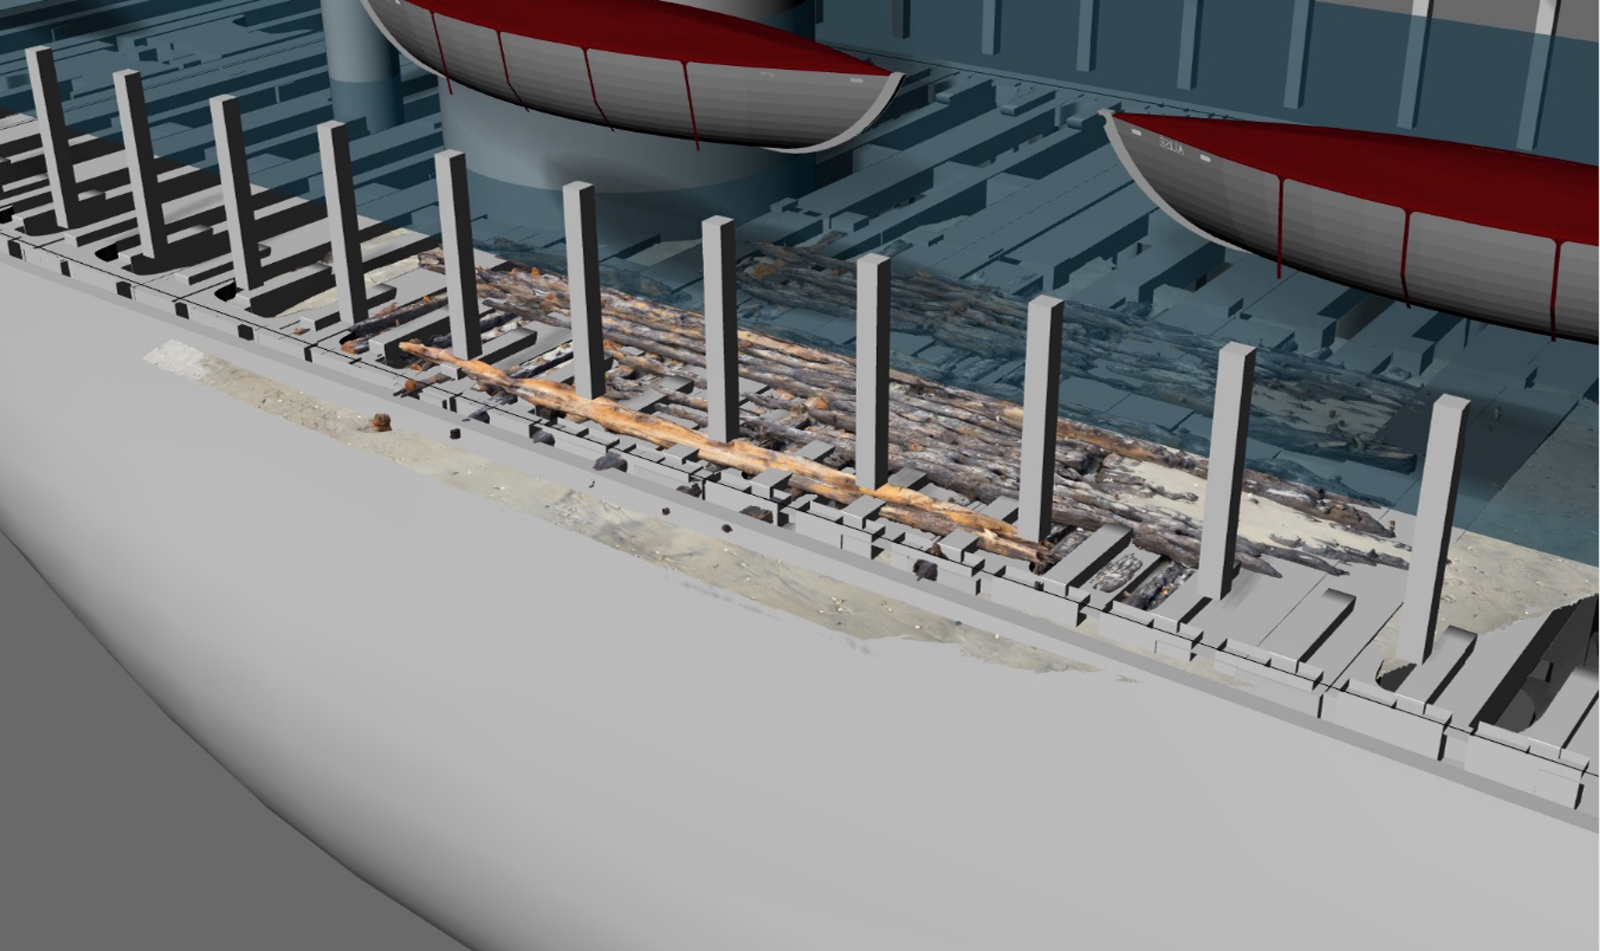 3D rendering created by Matthew Pawelski in his research paper showing how decking material on the Corolla beach potentially fits into the deck of the Metropolis.